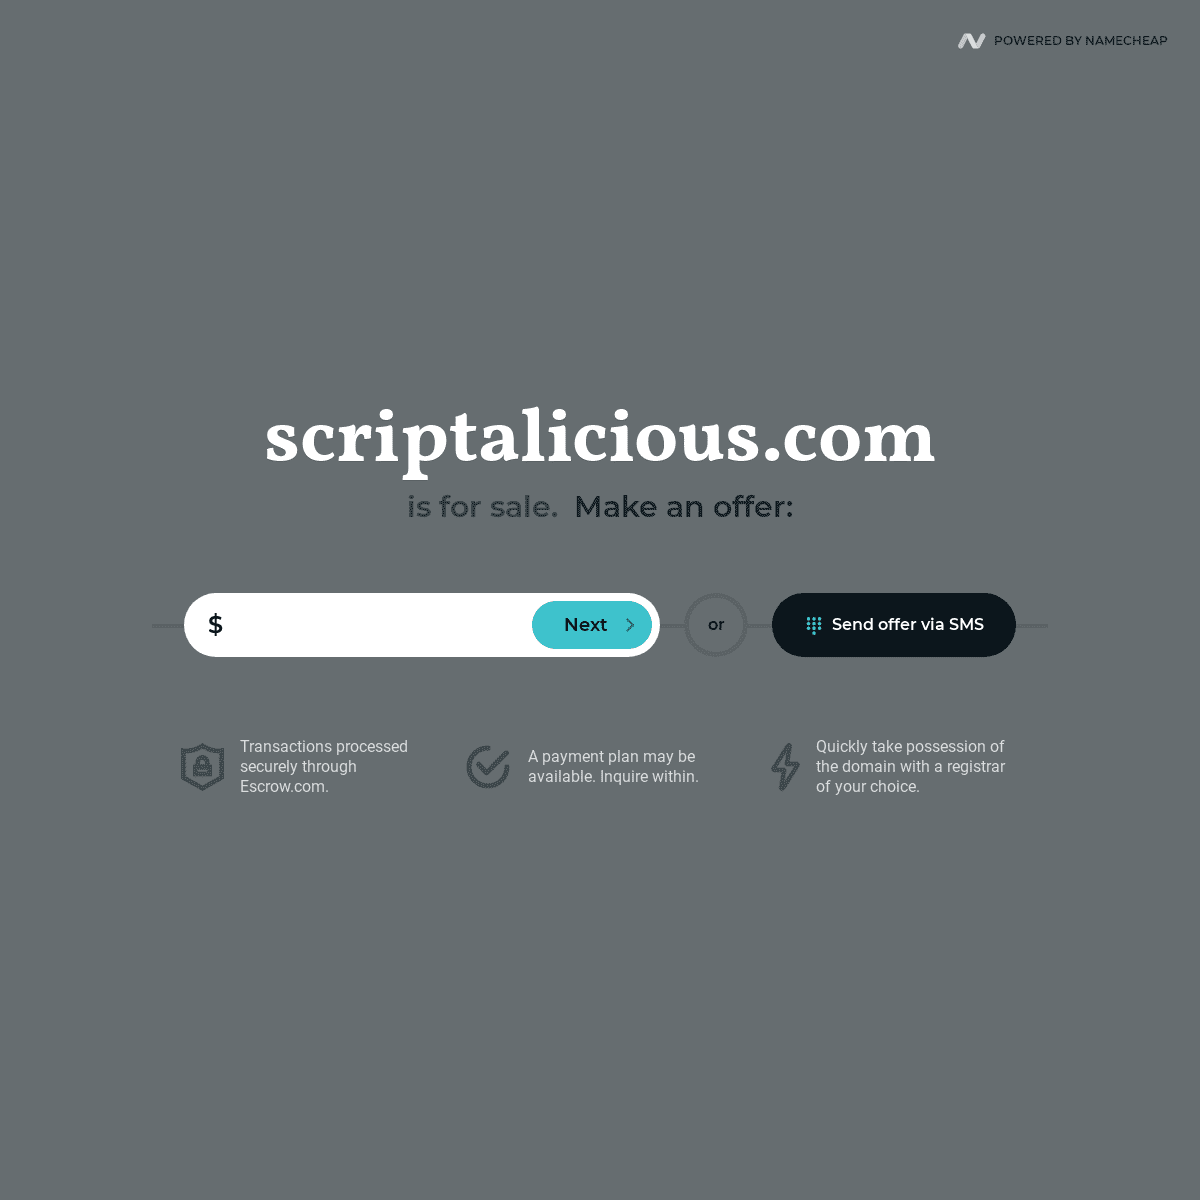 A complete backup of https://scriptalicious.com